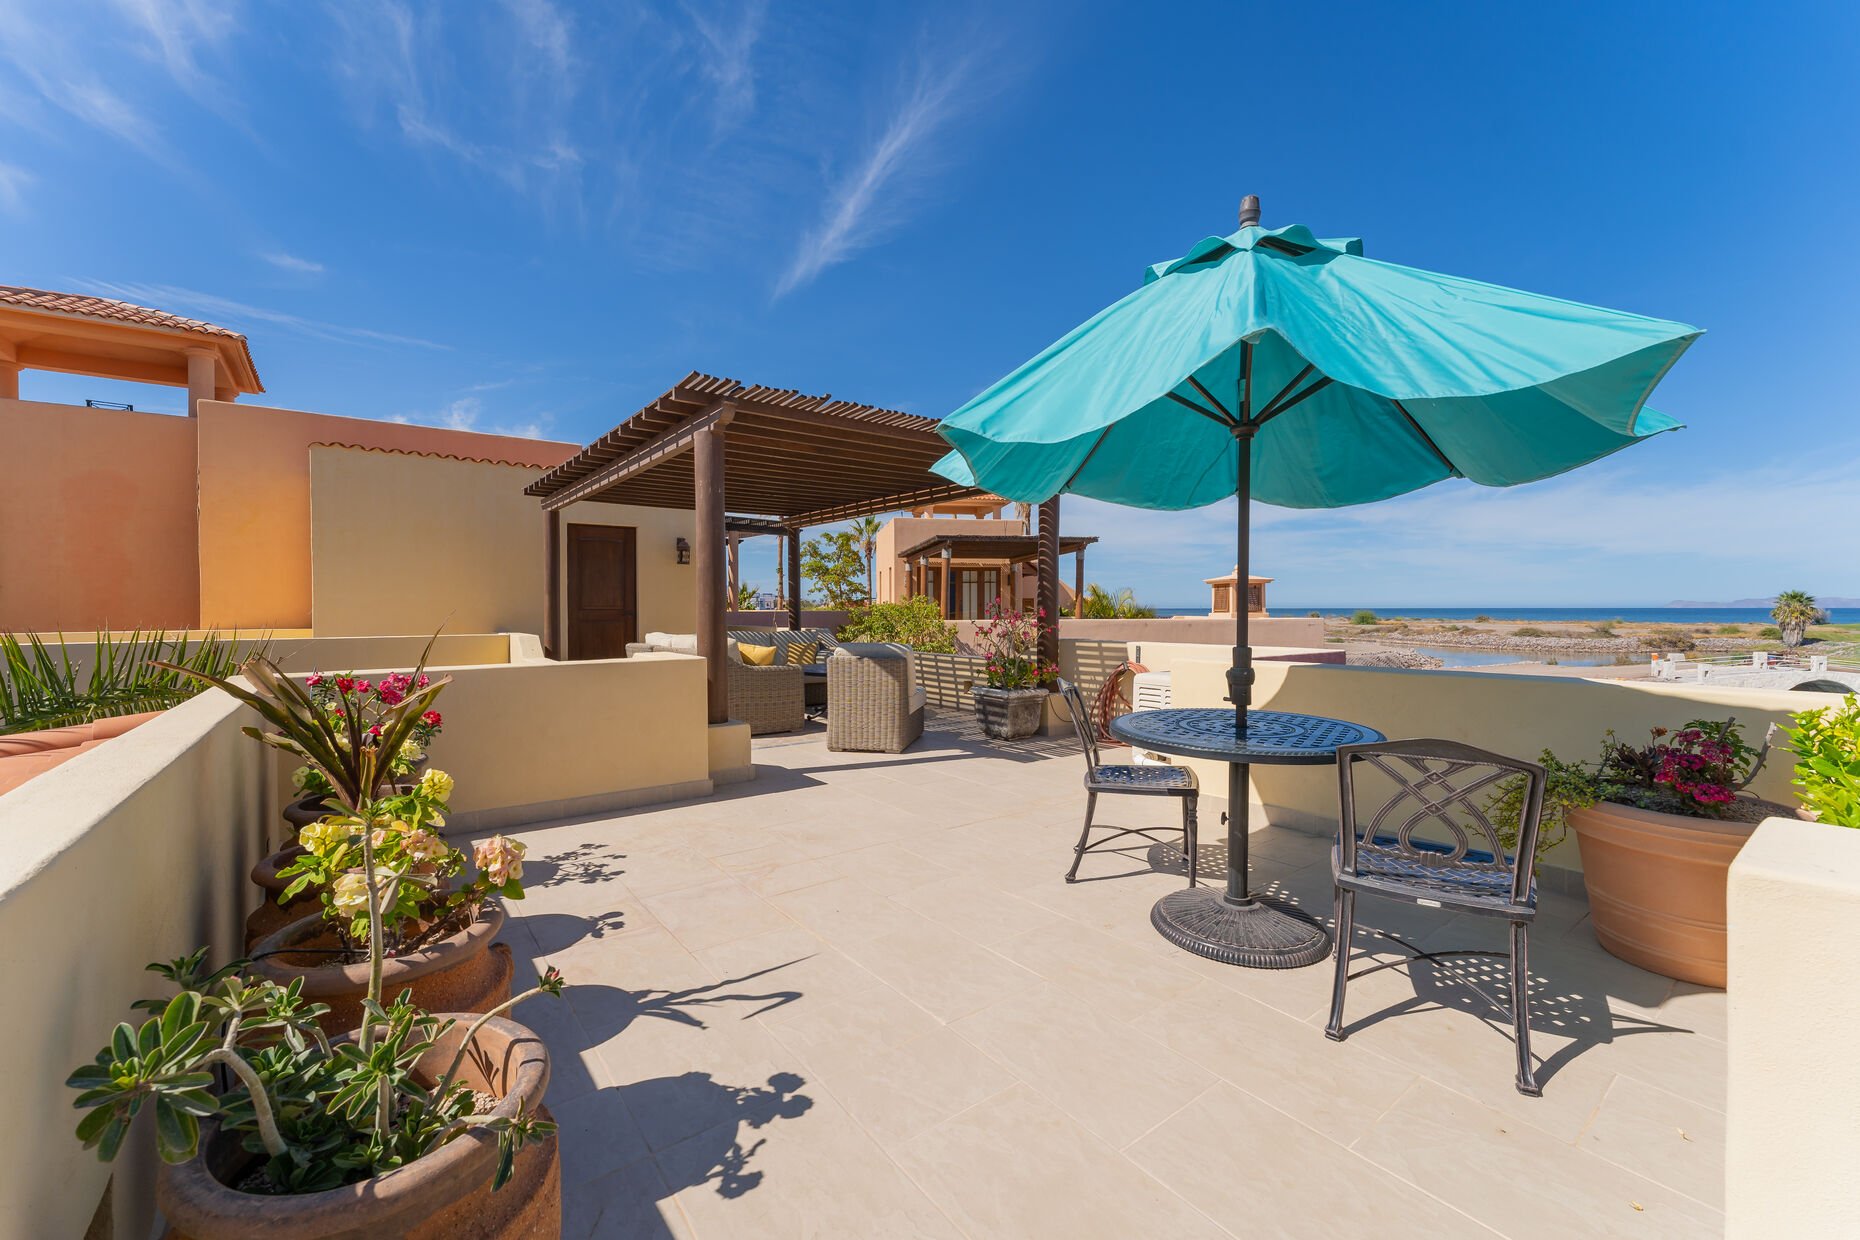 2nd floor coffee nook and shaded lounge/reading area with Sea of Cortez view